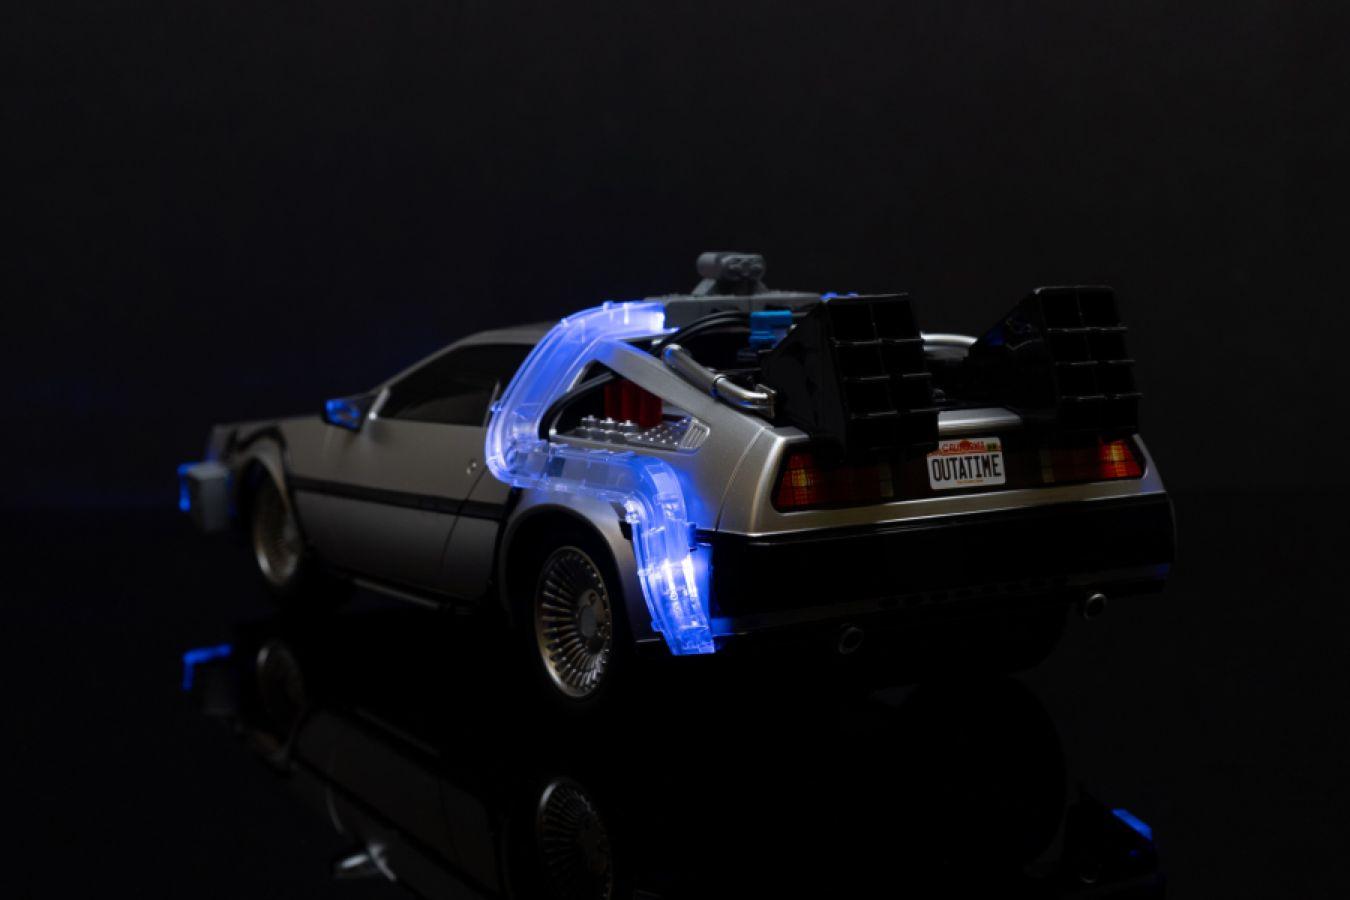 JAD34627 Back to the Future - Time Machine Remote Control 1:16 Scale Vehicle (with Light Up Function) - Jada Toys - Titan Pop Culture